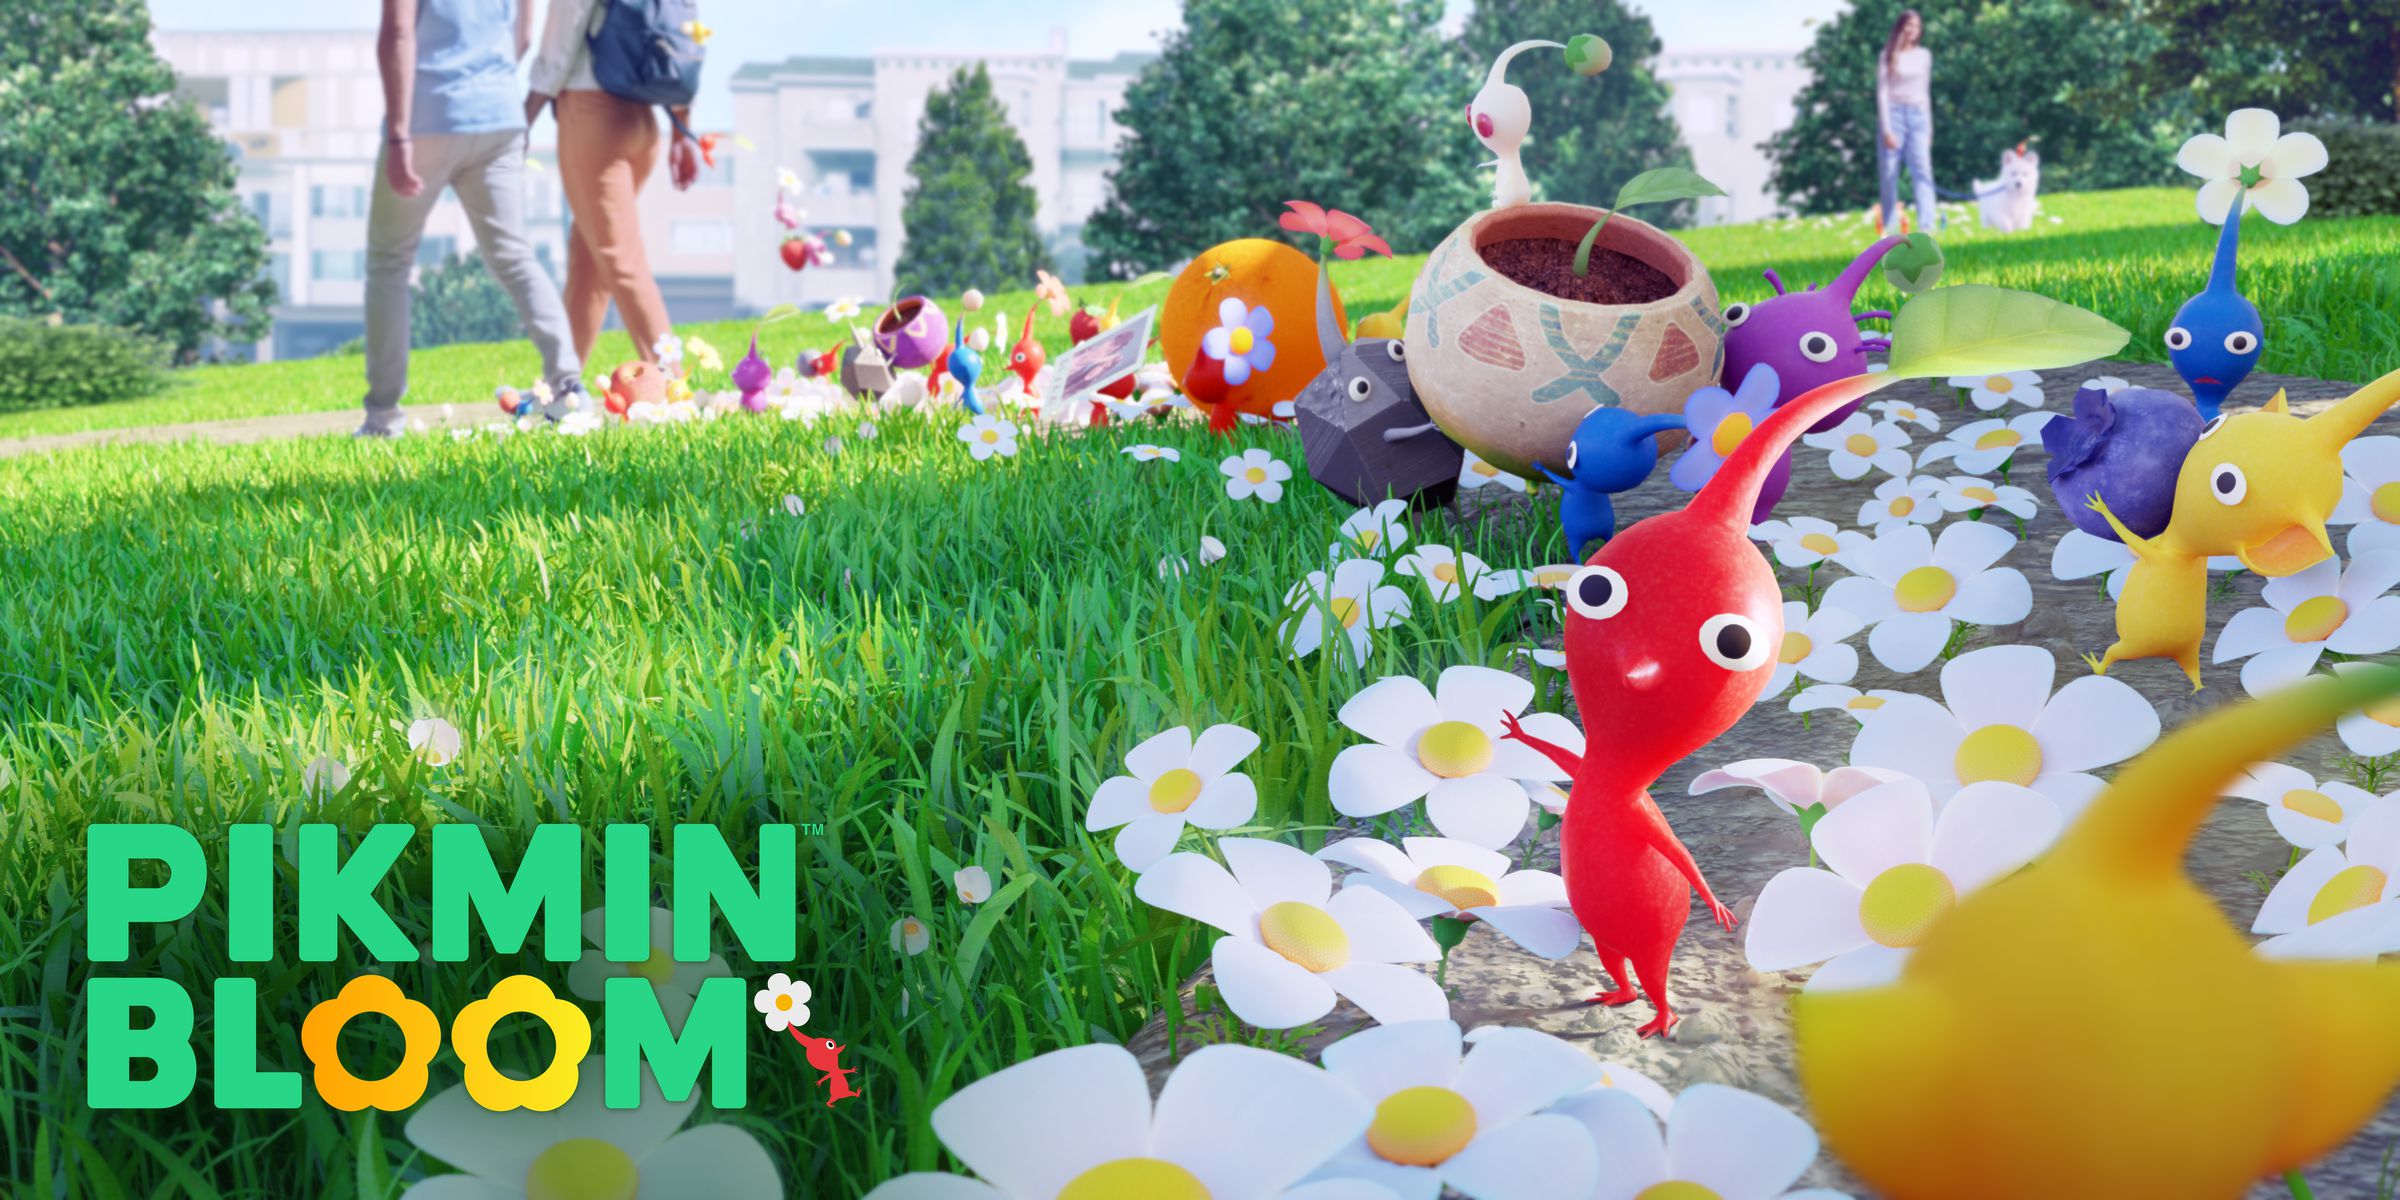 Pikmin Bloom screenshot: Colorful little creatures with big heads in the middle of a garden full of daisies.